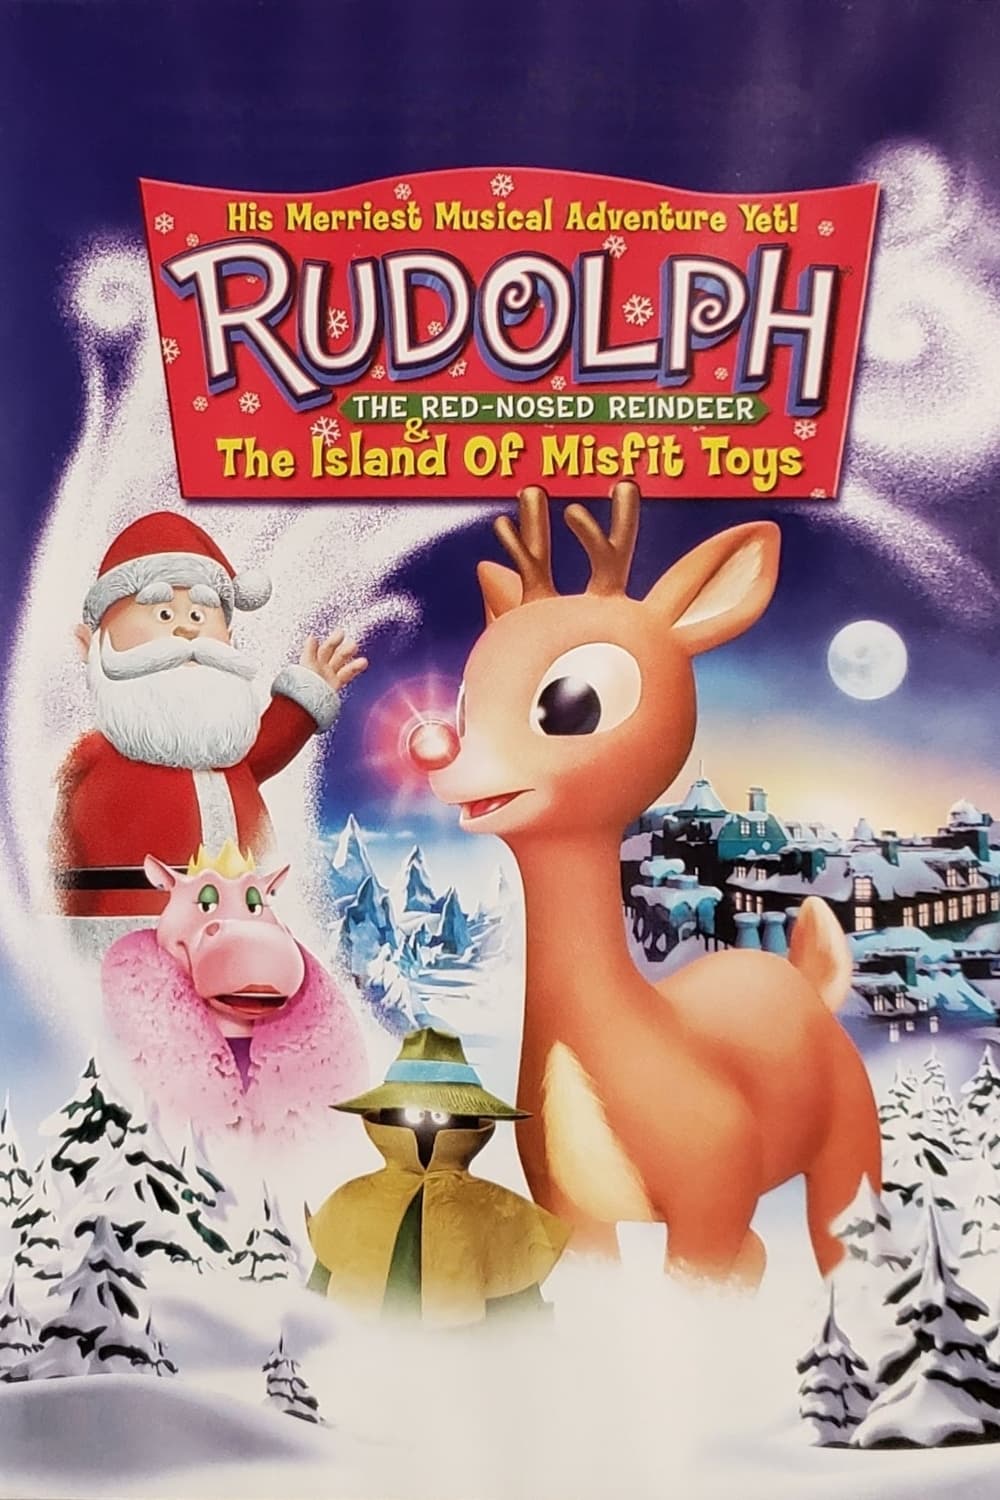 Rudolph the Red-Nosed Reindeer & the Island of Misfit Toys (2001)